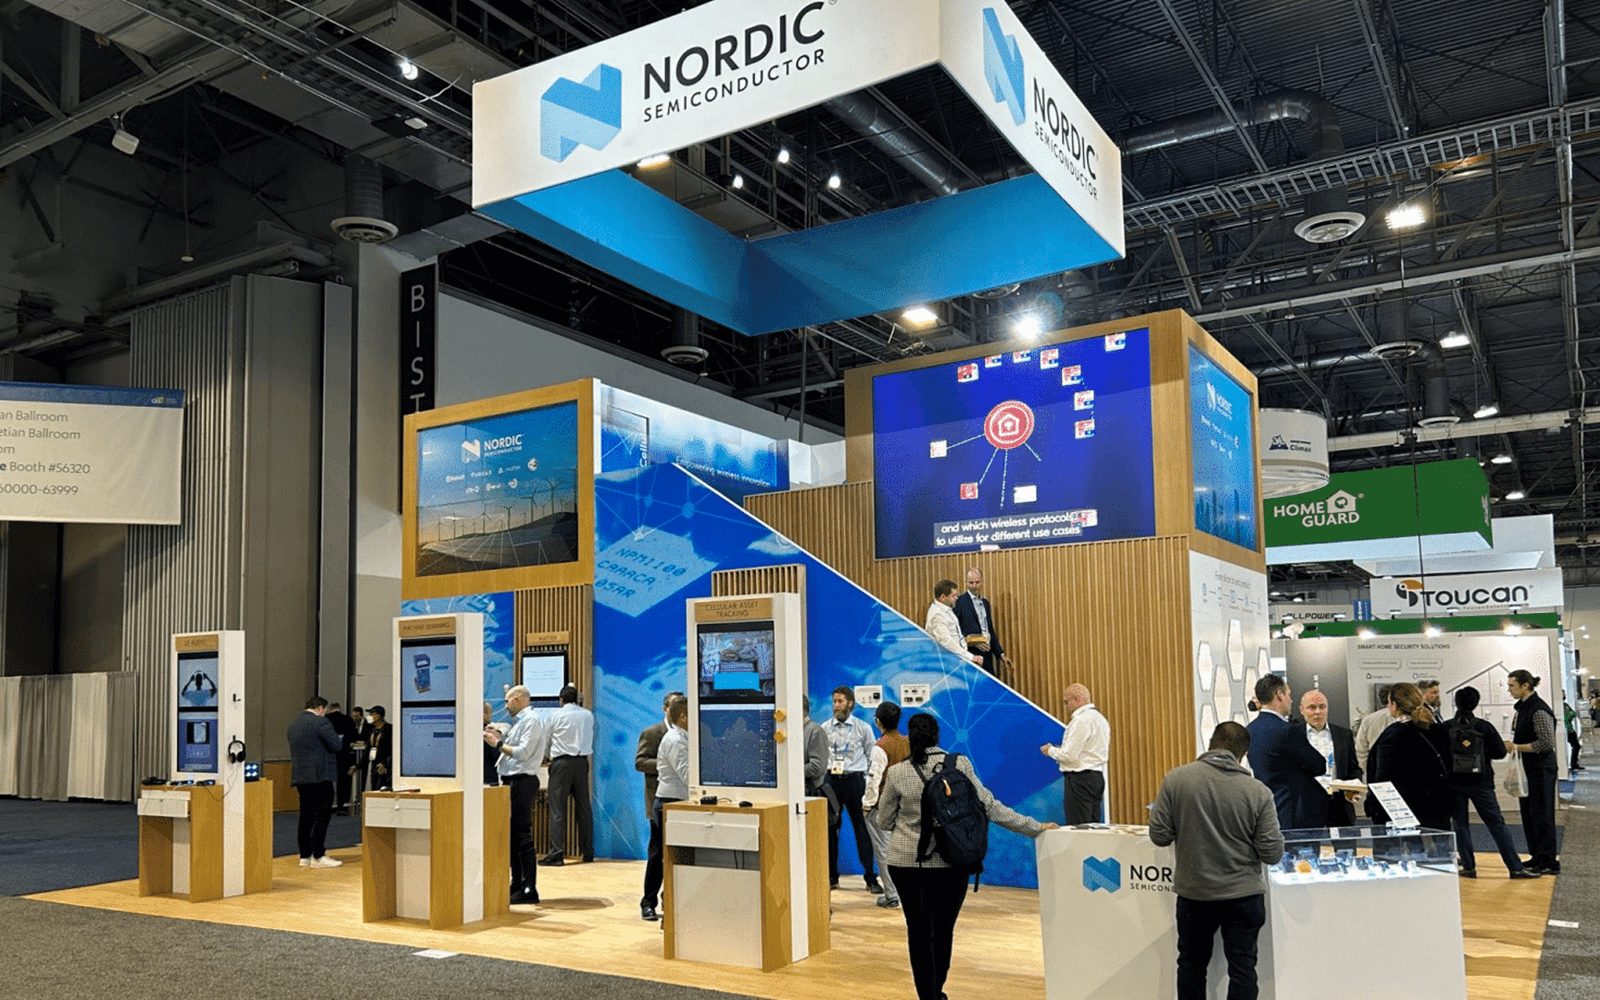 Nordic Semiconductor's two-level booth